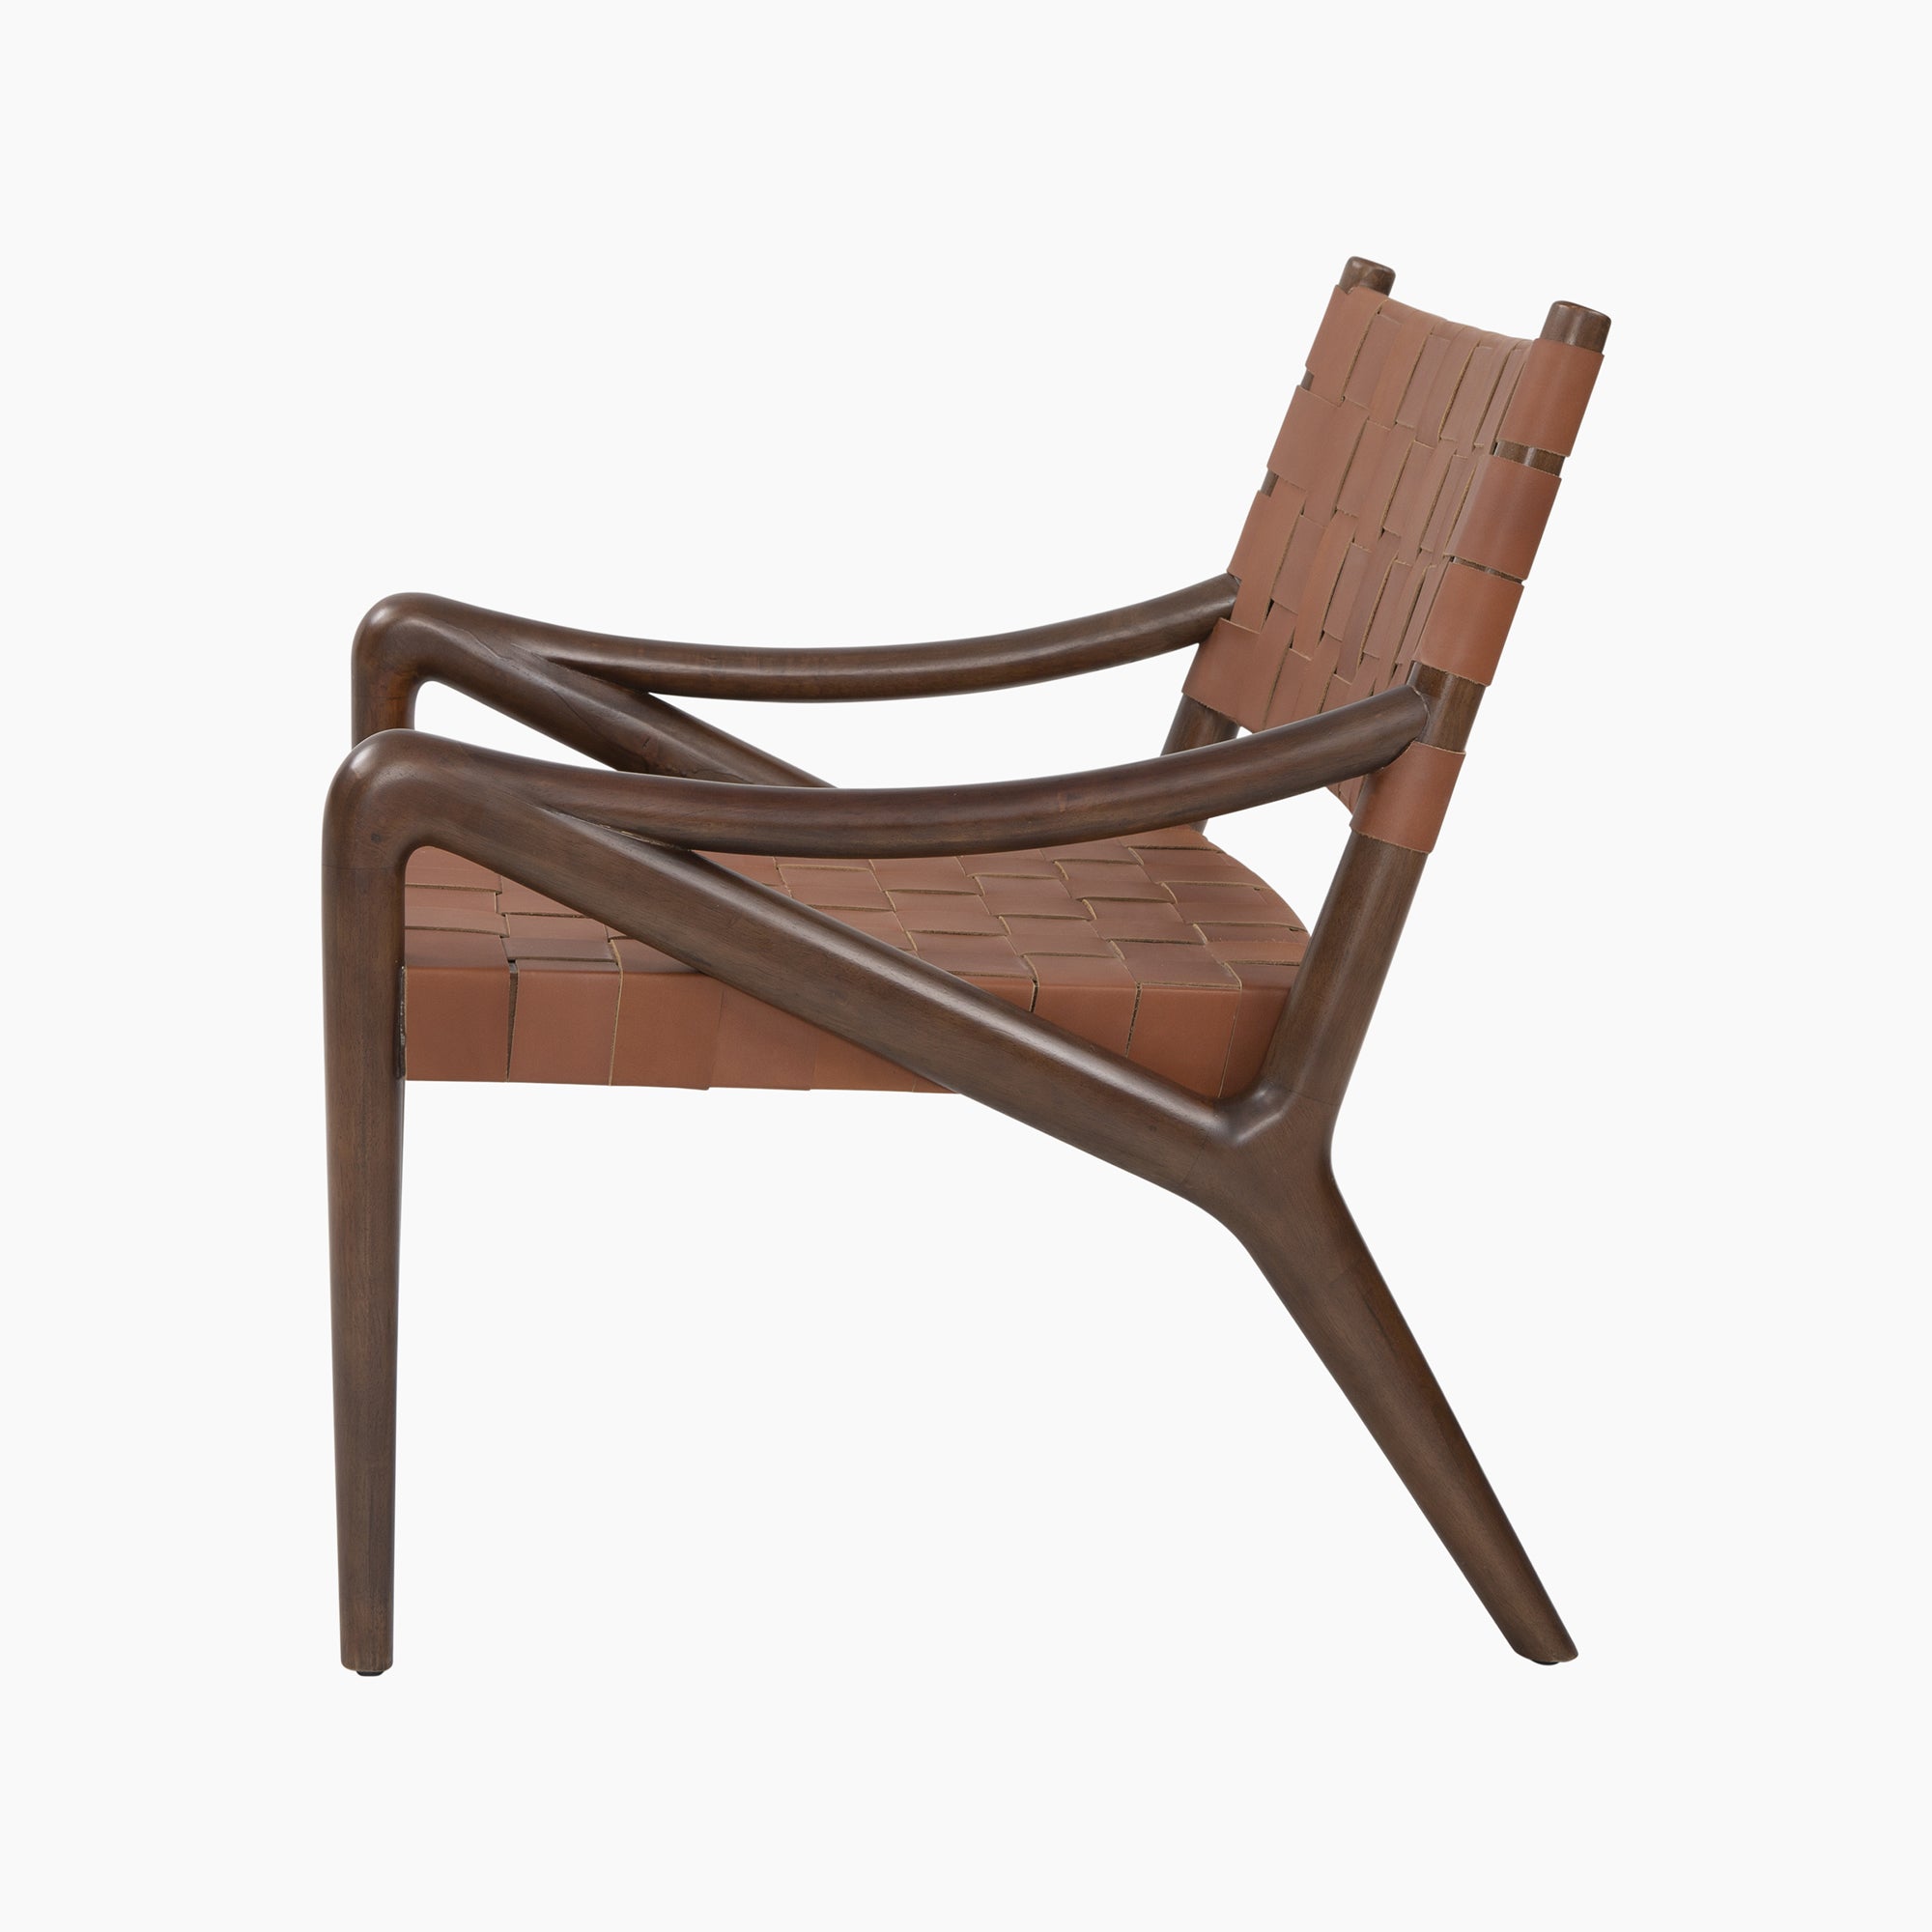 Leather Crombie Armchair – Walnut Frame With Woven Tan Leather